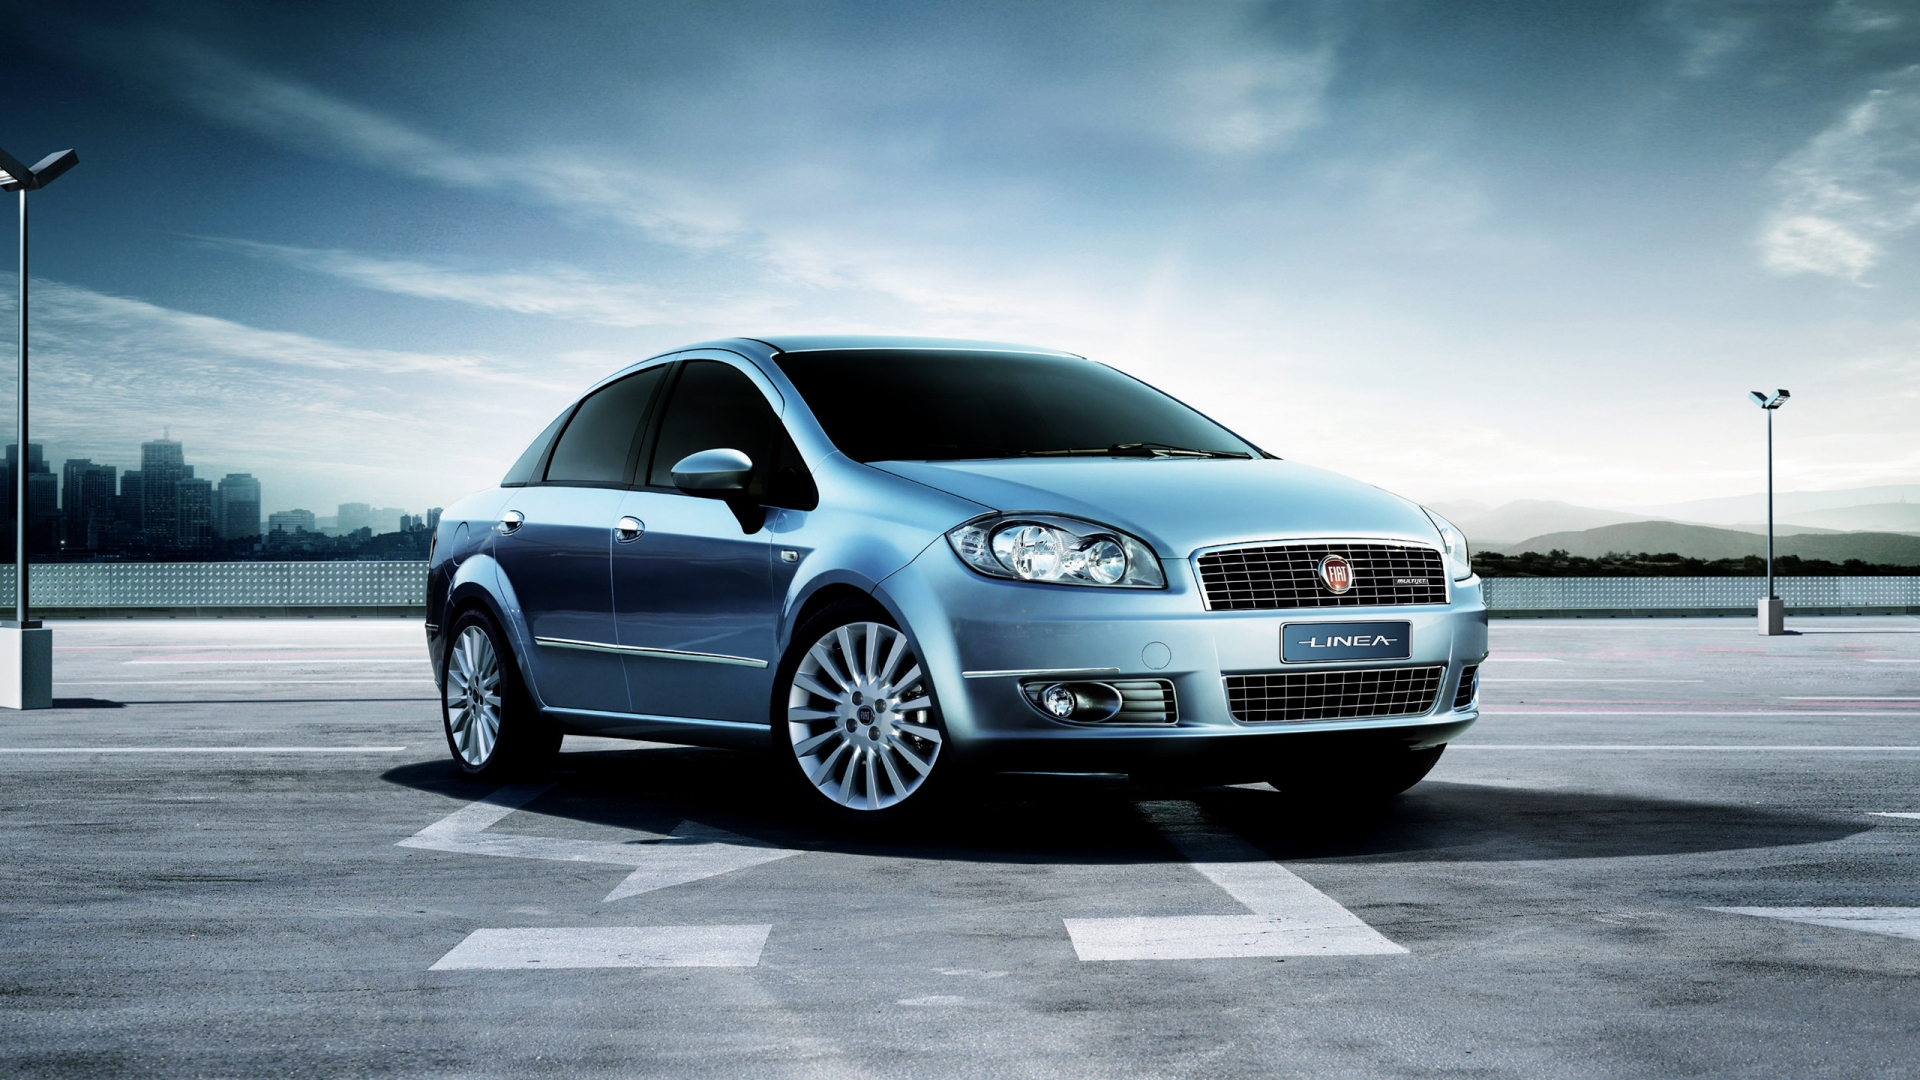 Fiat Linea 2009 for 1920 x 1080 HDTV 1080p resolution